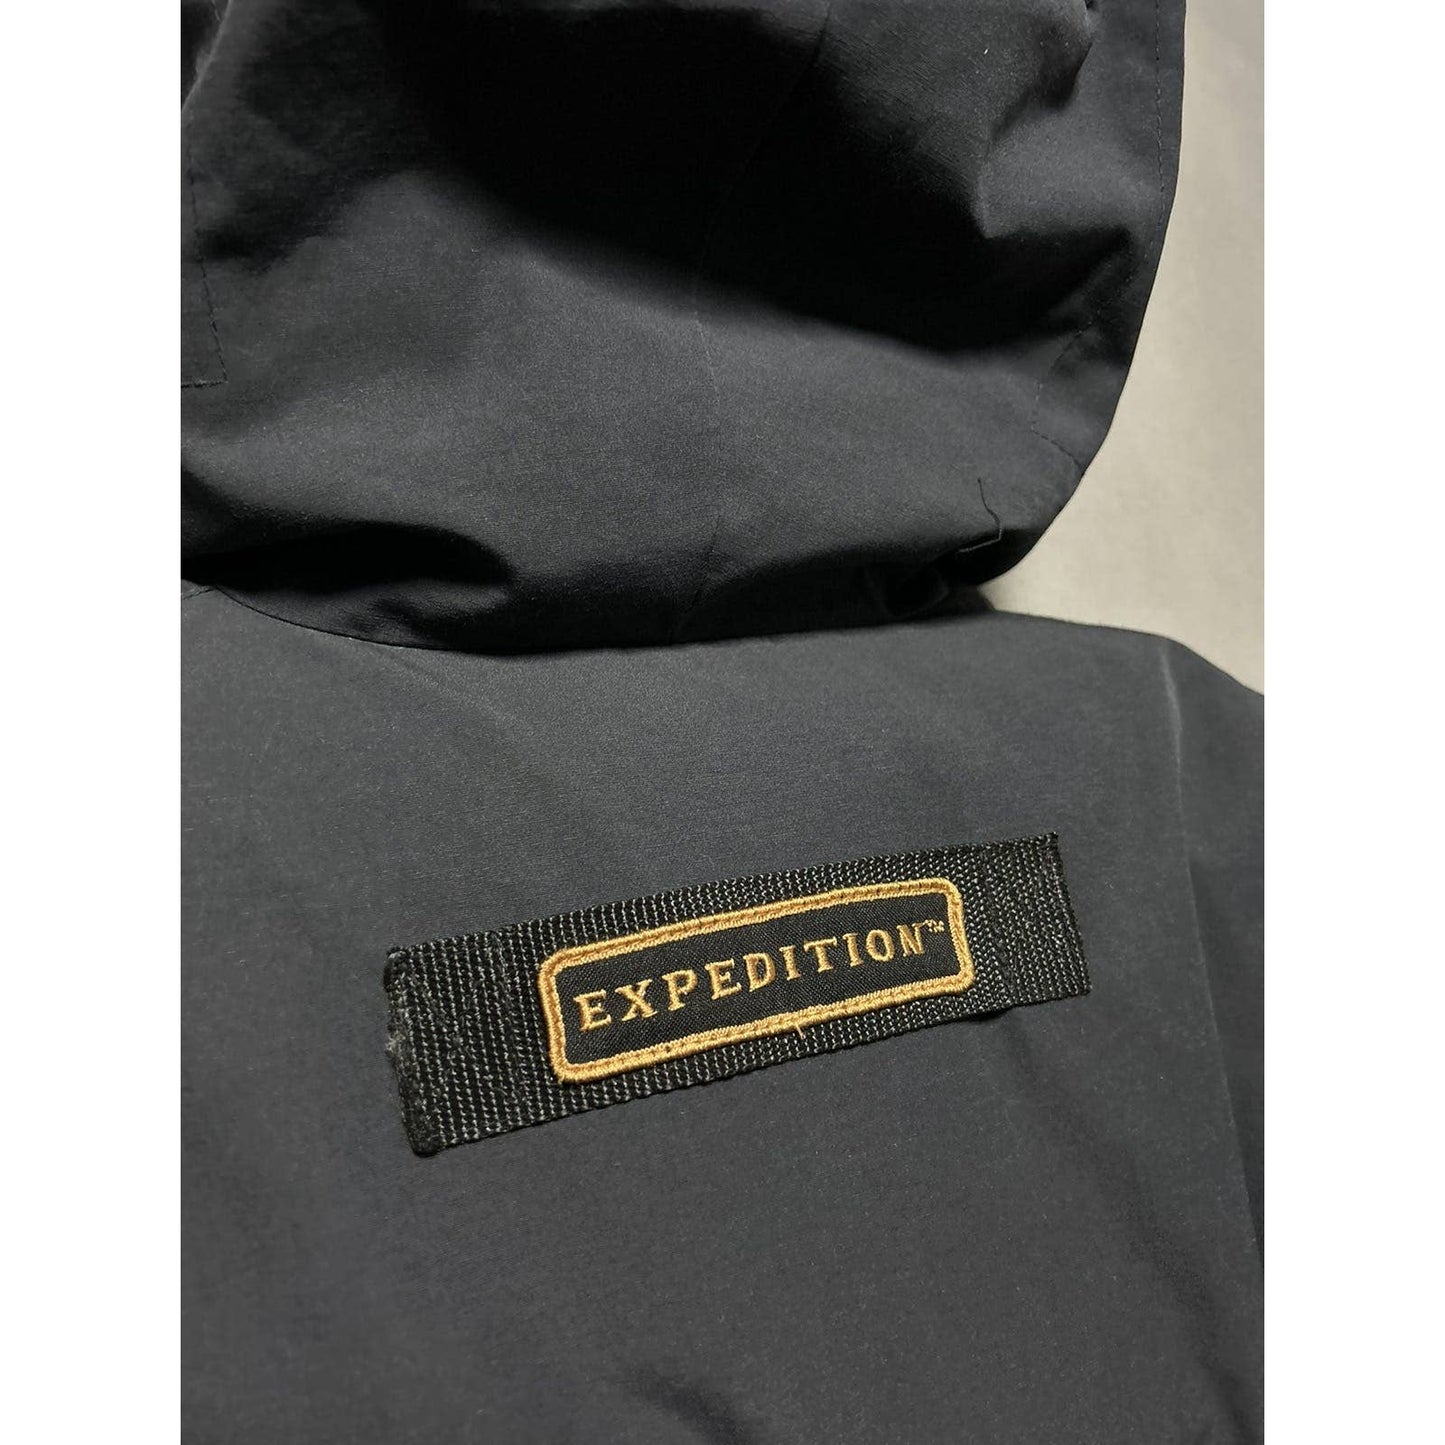 Canada Goose navy expedition parka jacket puffer